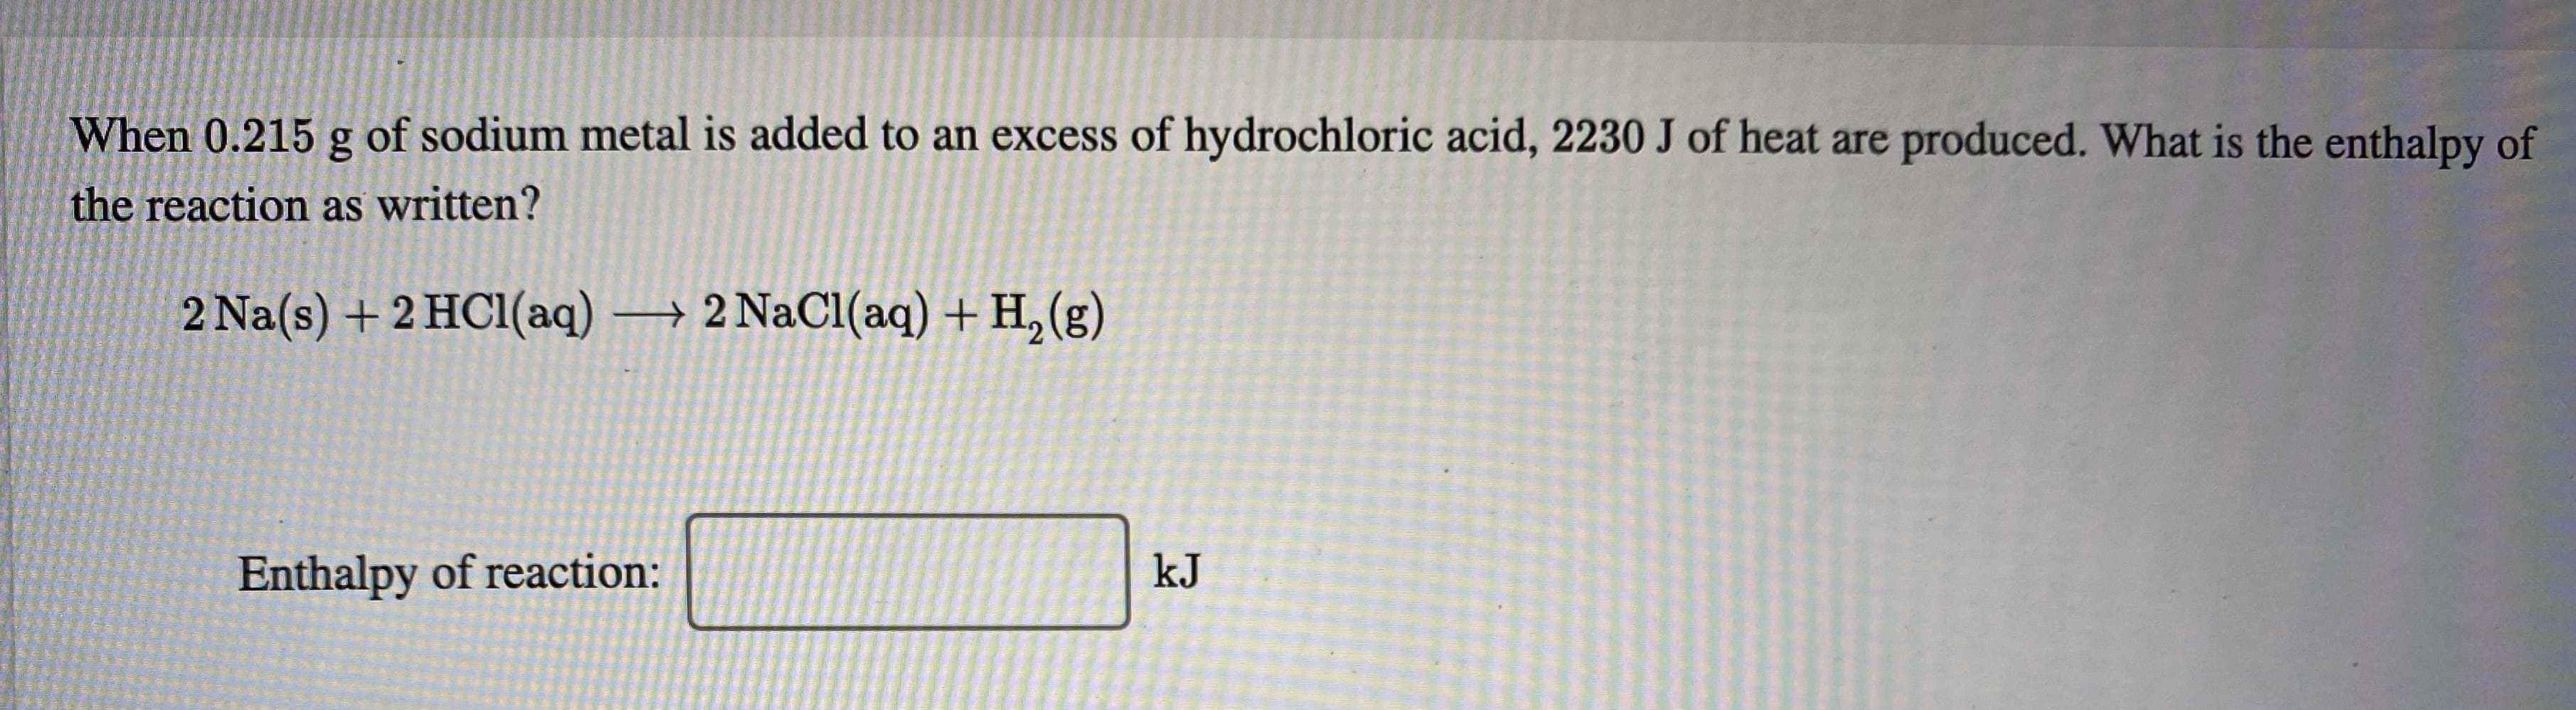 When 0.215 g of sodium metal is added to an excess of hydrochloric acid, 2230 J of heat are produced. What is the enthalpy of
the reaction as written?
2 Na(s) +2 HC1(aq)
→ 2 NaCl(aq) + H, (g)
Enthalpy of reaction:
kJ
